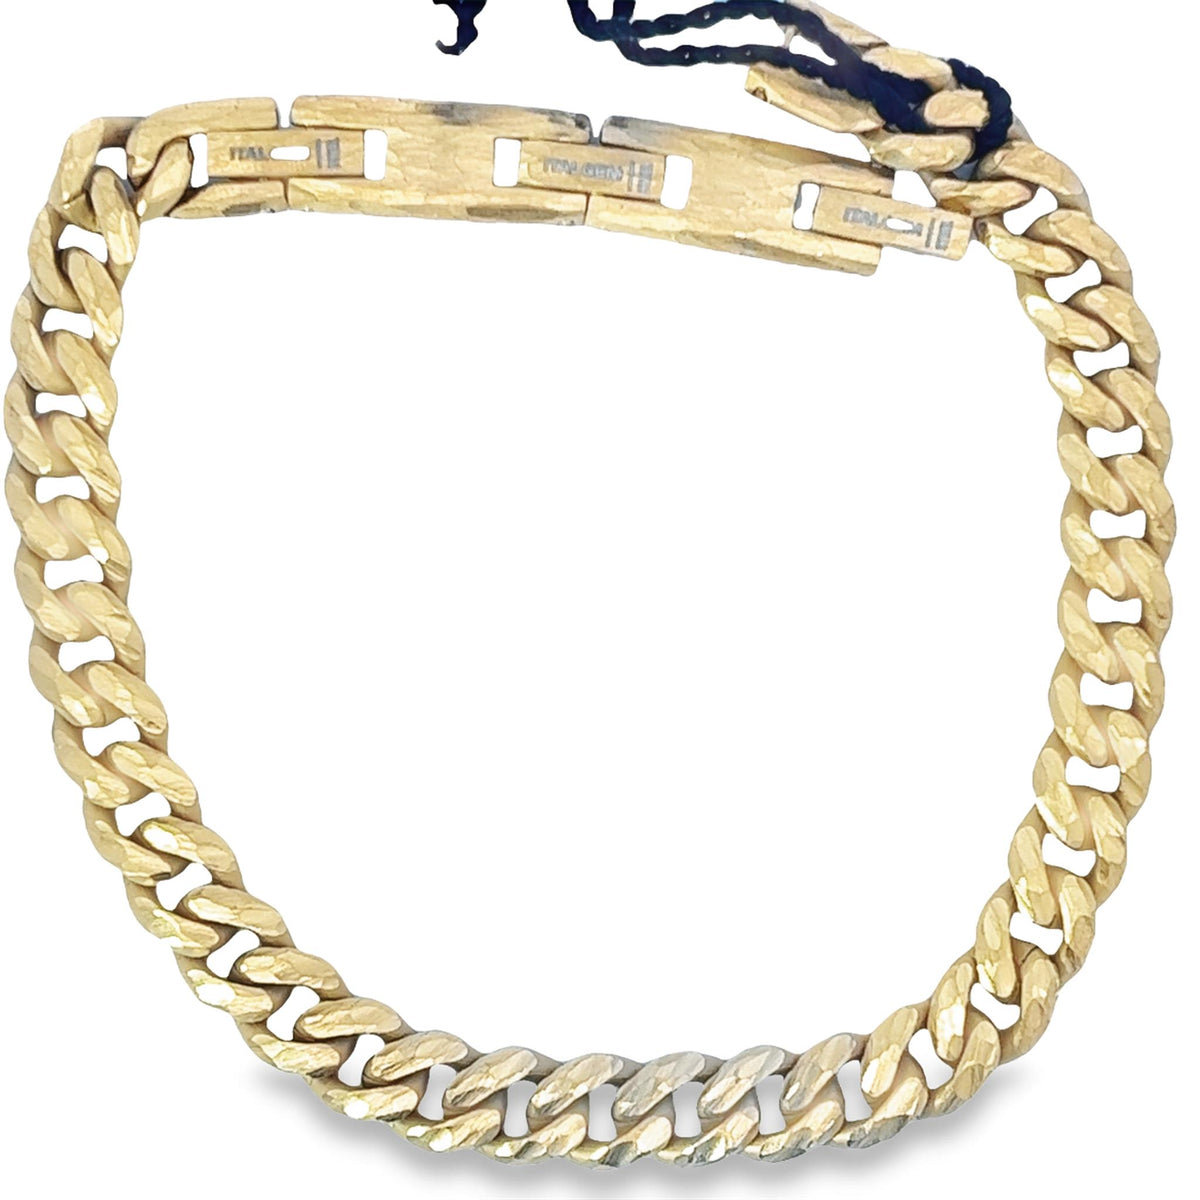 Italgem Stainless Steel Gold IP Plated Curb Link Bracelet with Extension